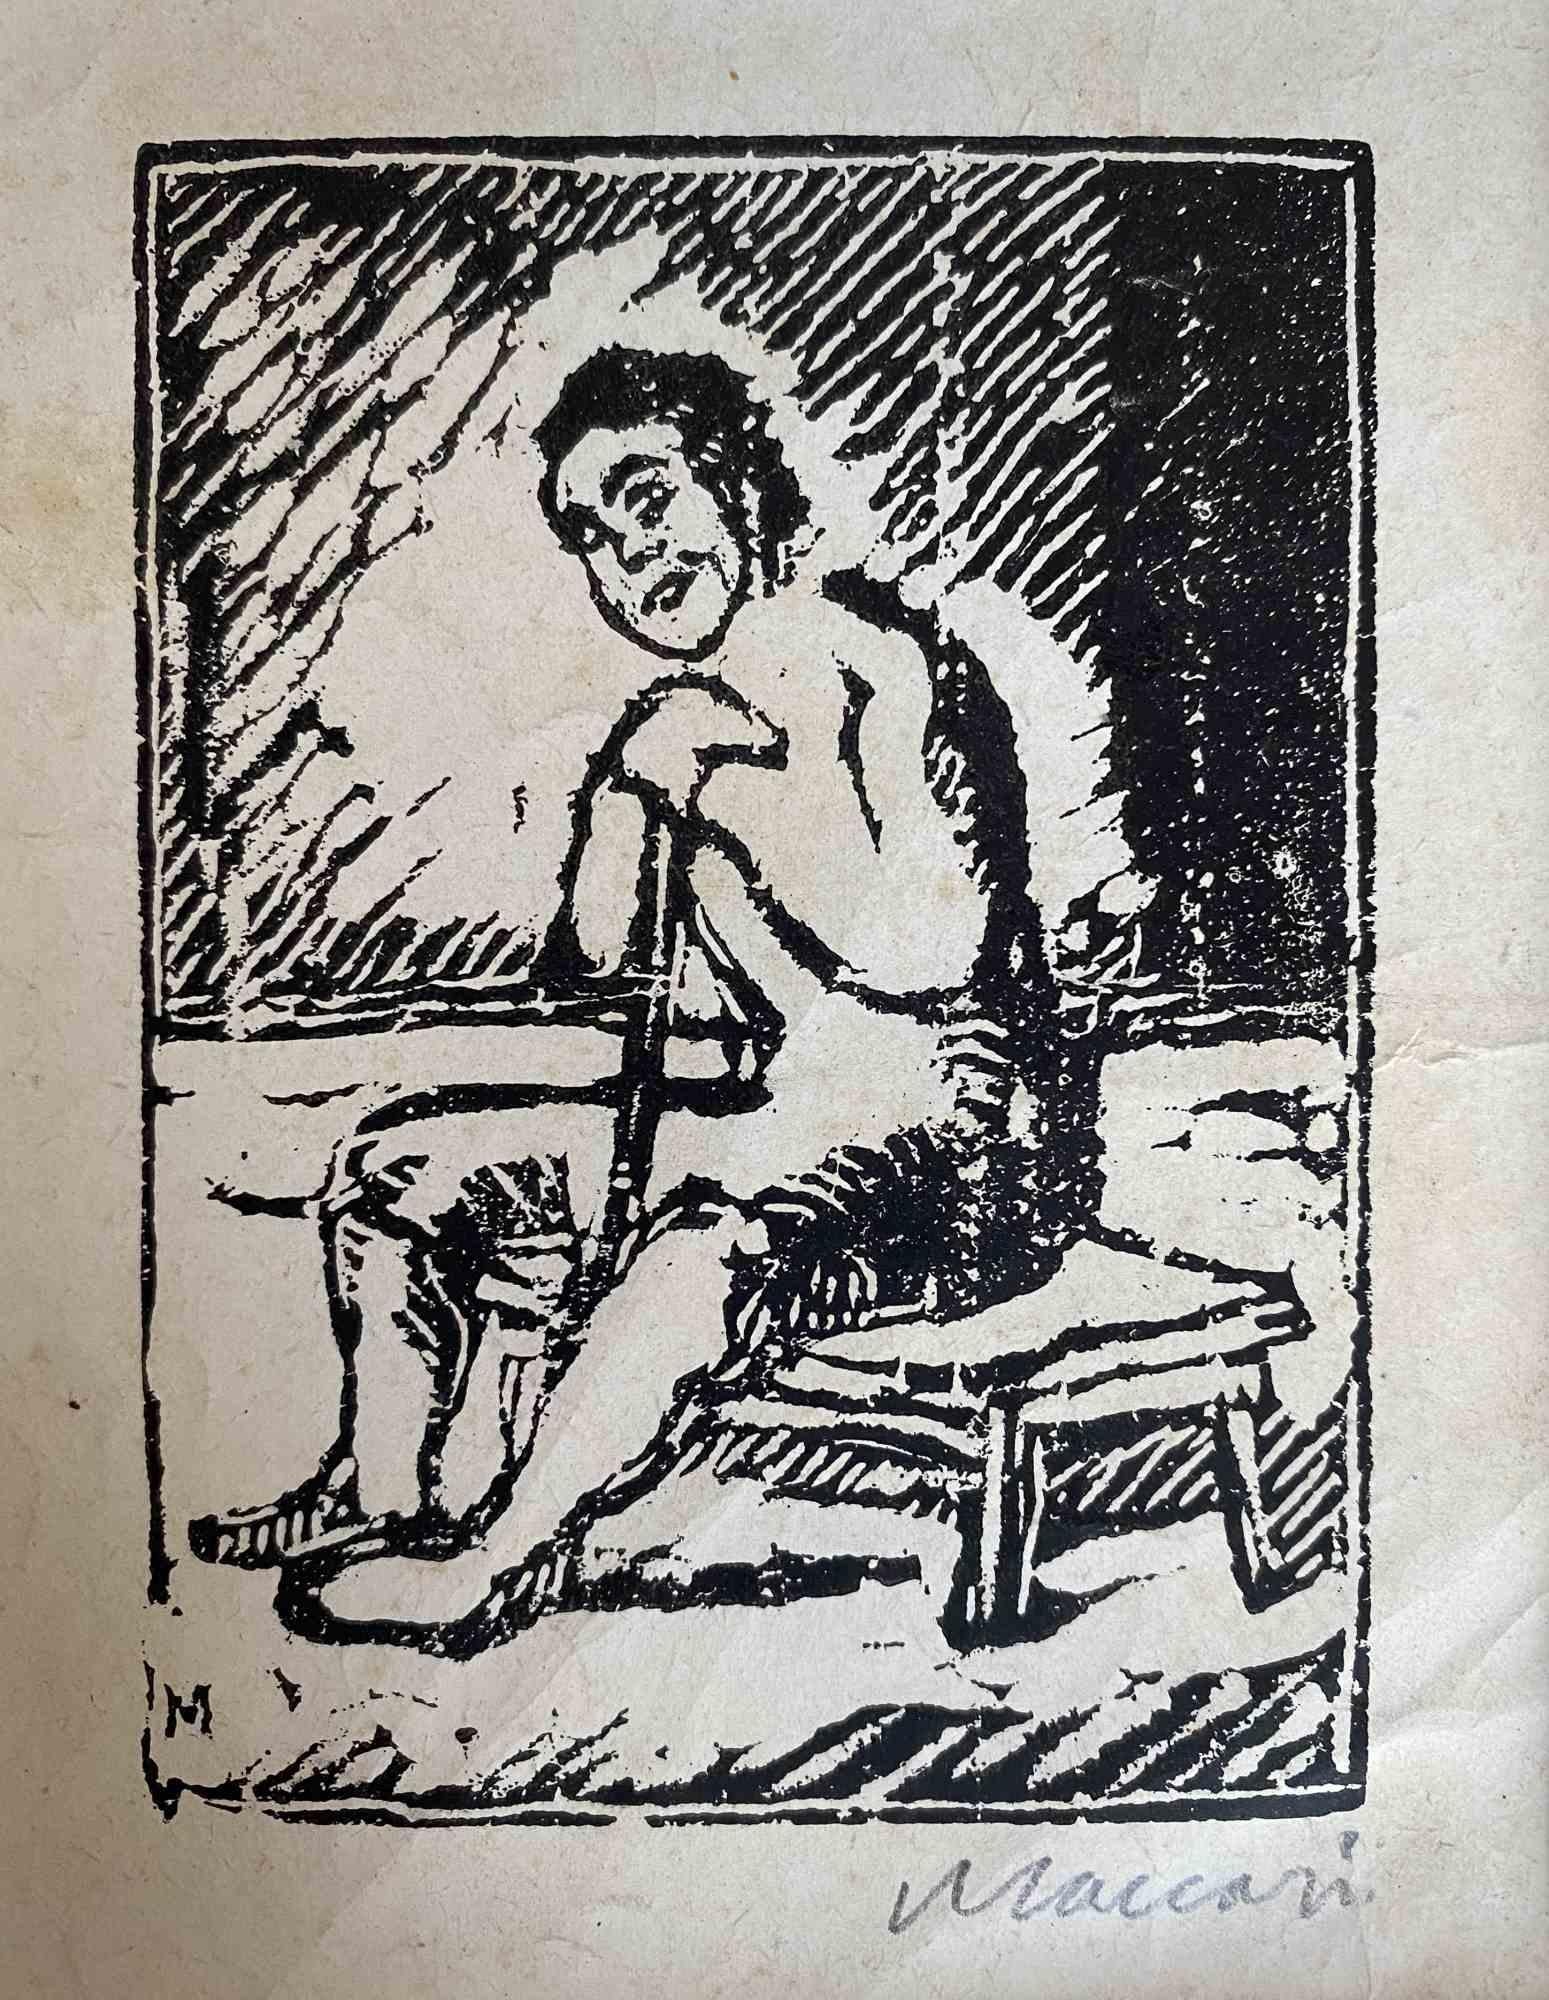 Waiting Man is a woodcut print on paper realized by Mino Maccari in 1926.

Hand-signed on the lower in pencil

Good conditions with minor foxing.

Mino Maccari (1898-1989) was an Italian writer, painter, engraver, and journalist, winner the